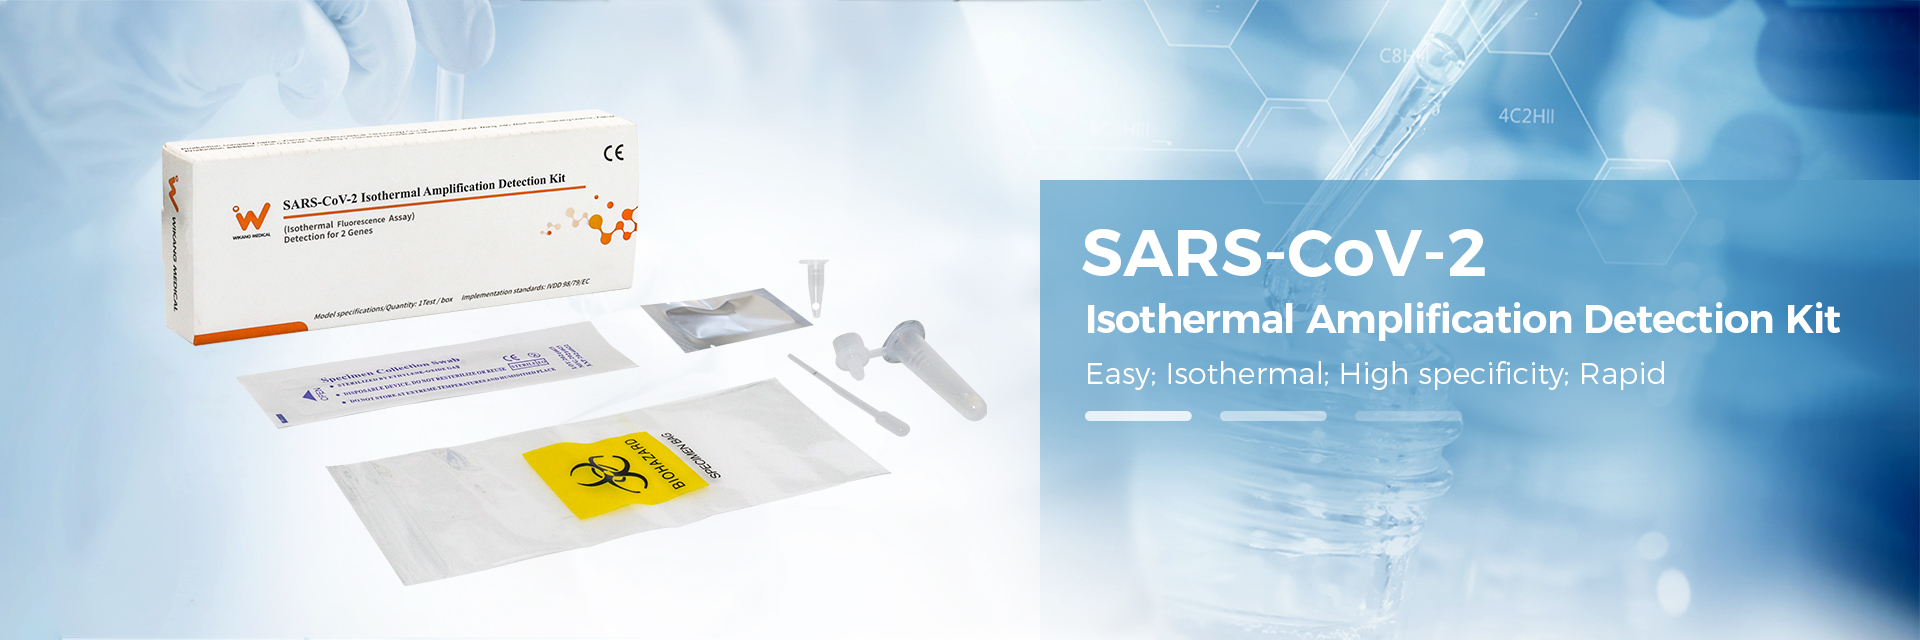 SARS-CoV-2 Isotherm Amplification Detection Kit